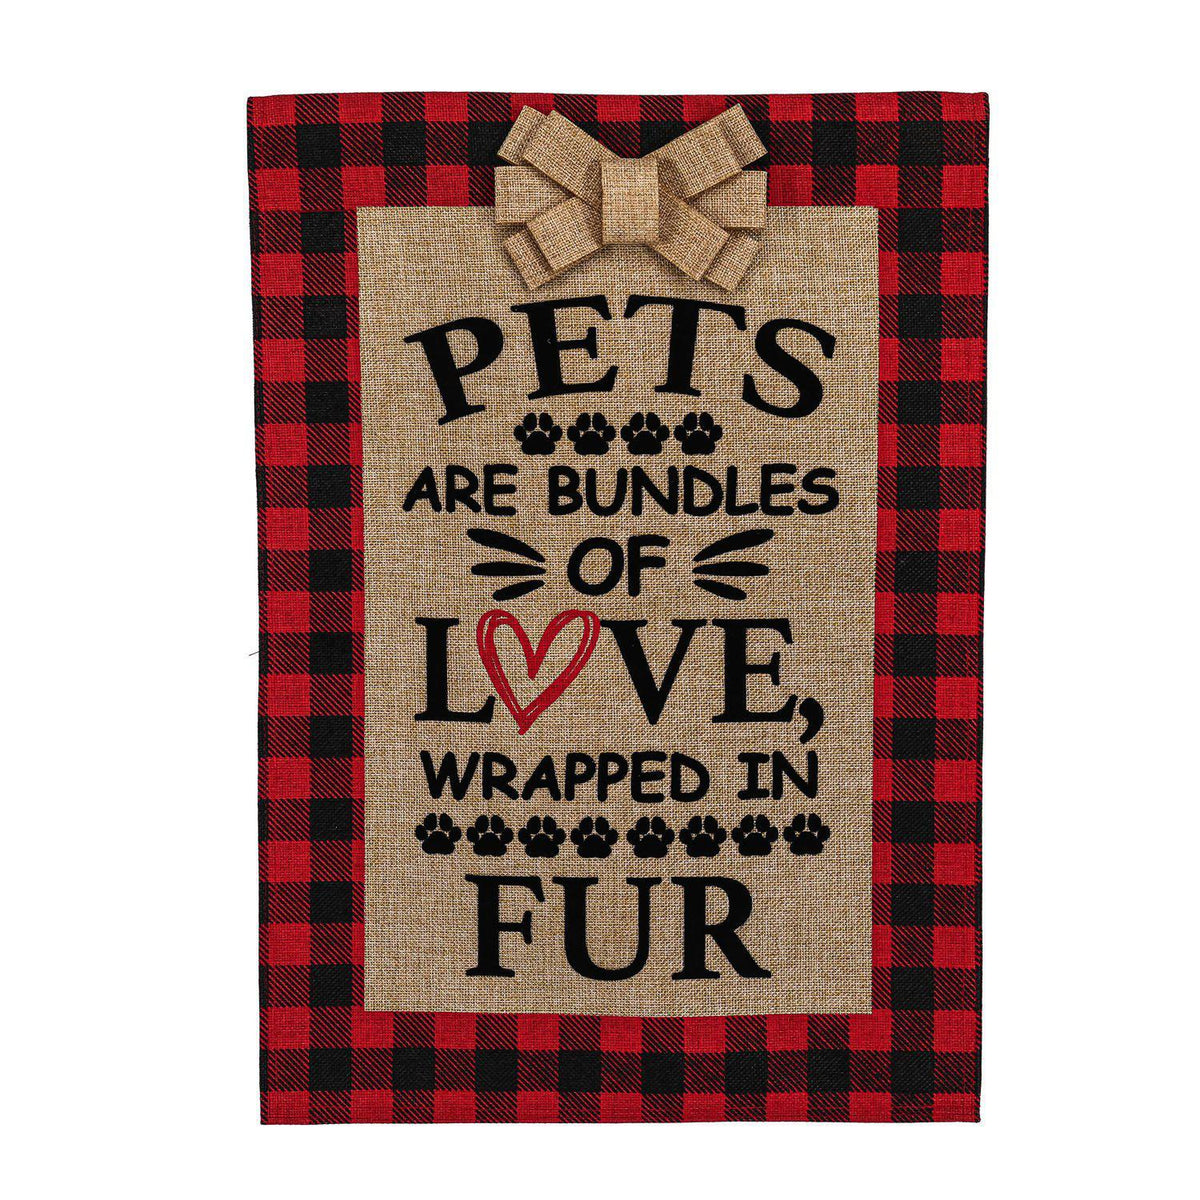 The Pets Are Bundles of Love garden flag features a black and red buffalo check border, burlap bow, and the words "Pets Are Bundles of Love Wrapped in Fur".